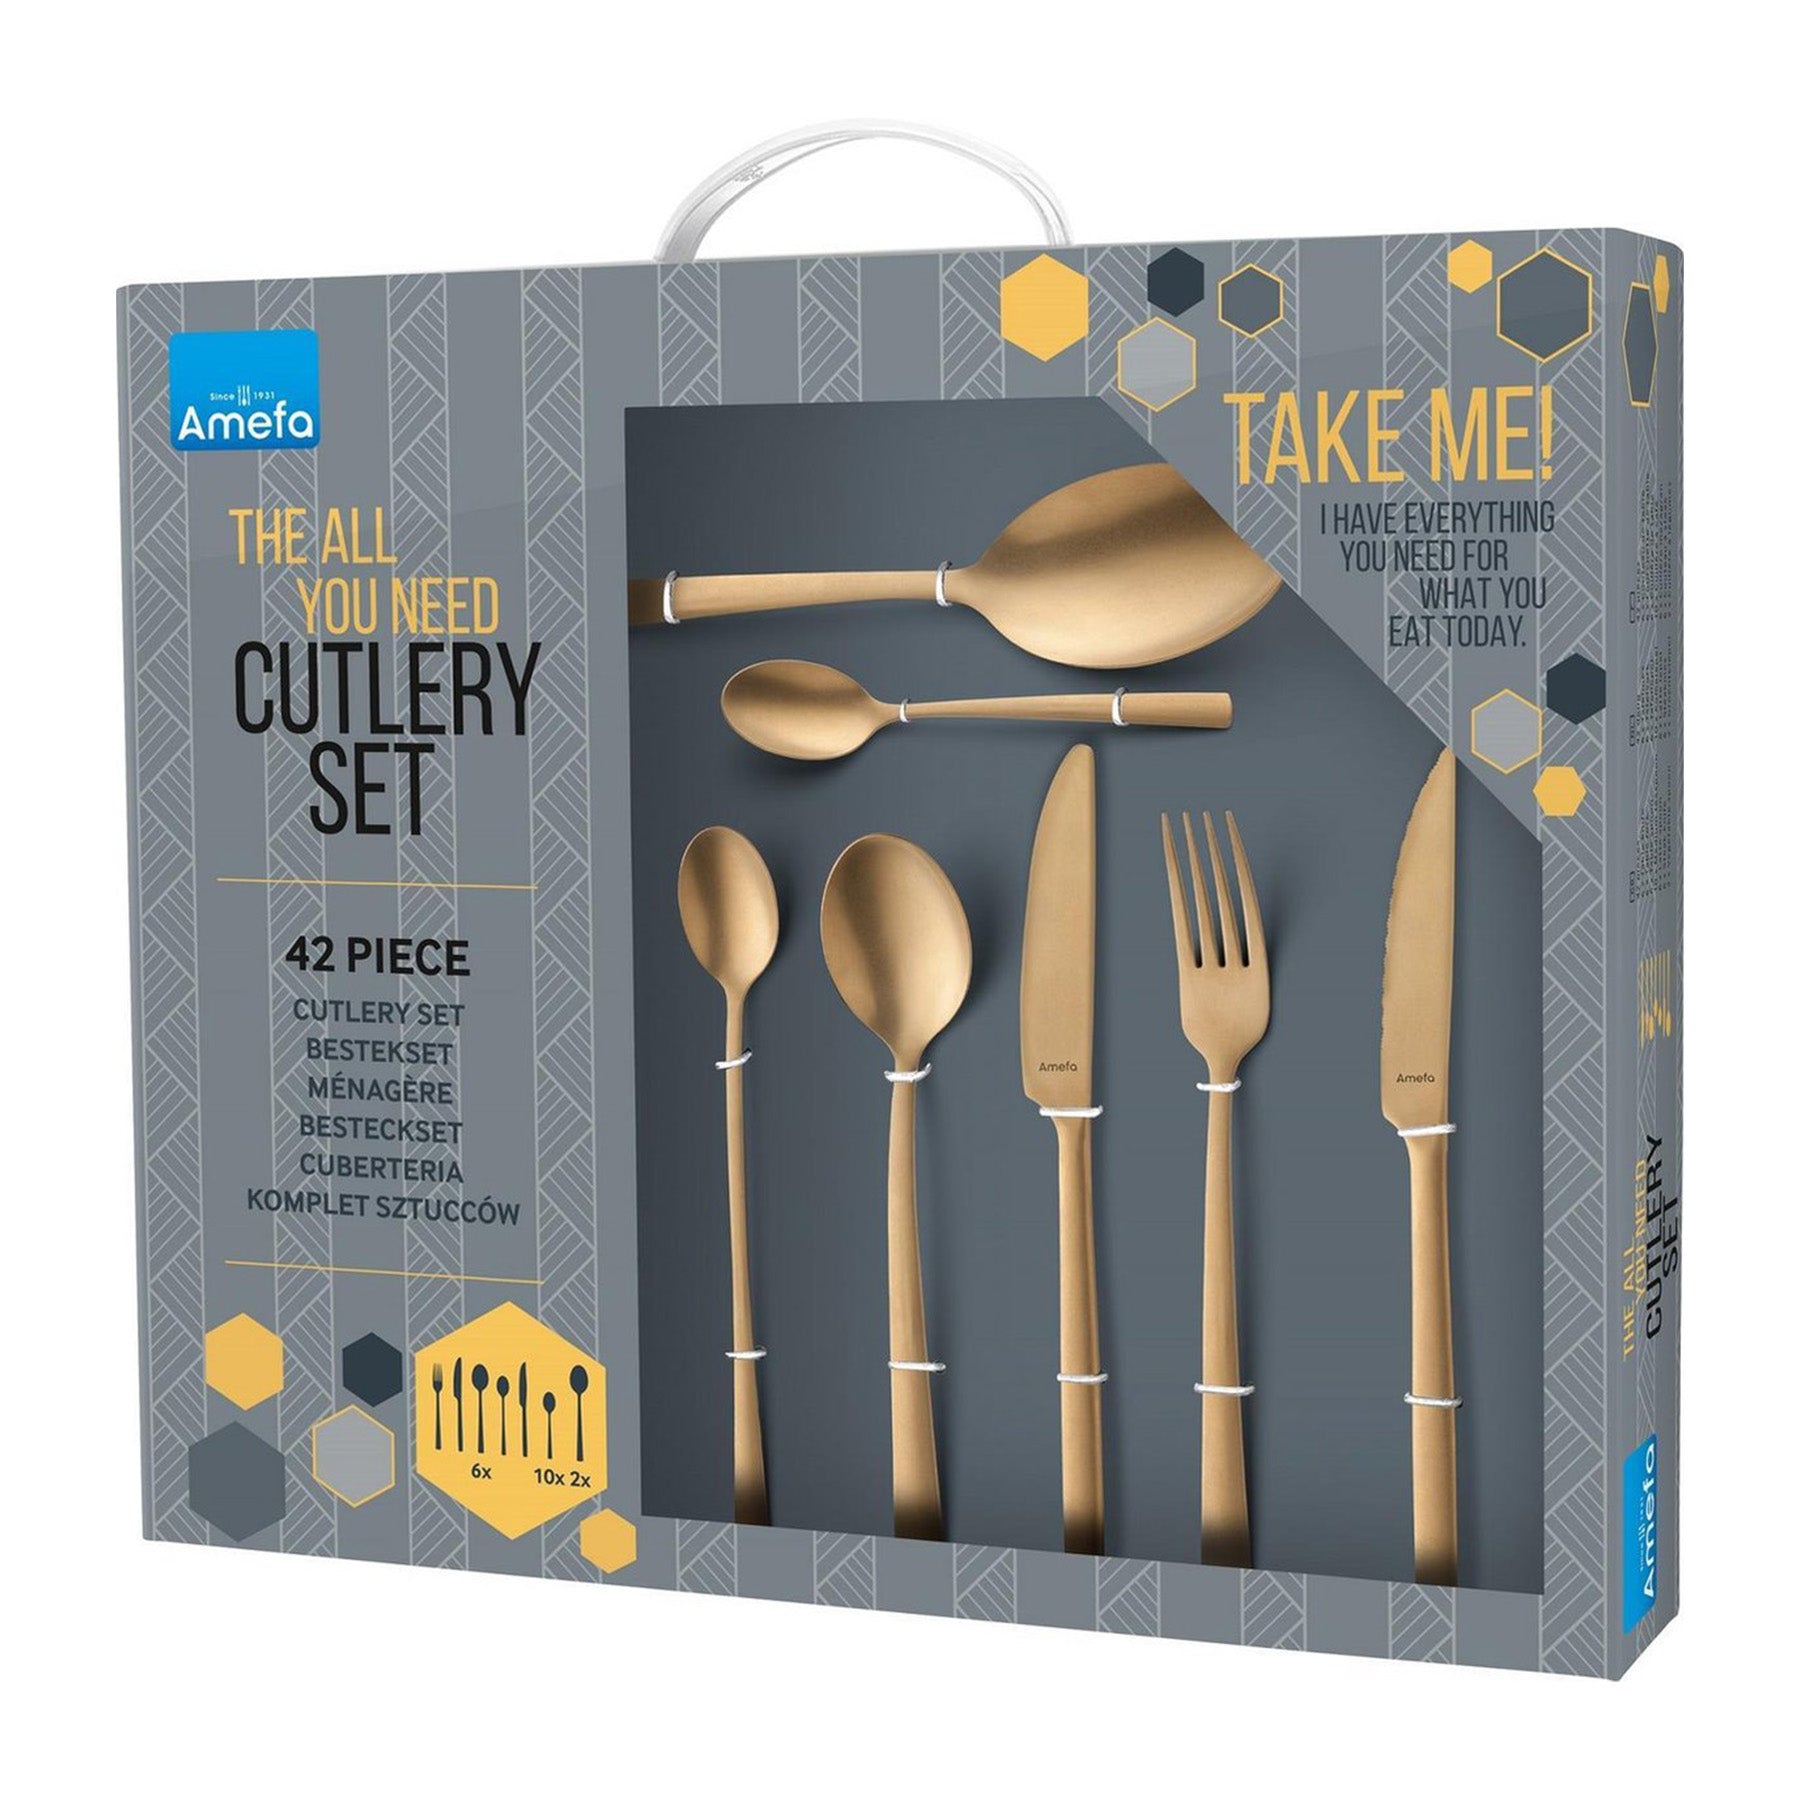 All you need cutlery set of 42 pcs